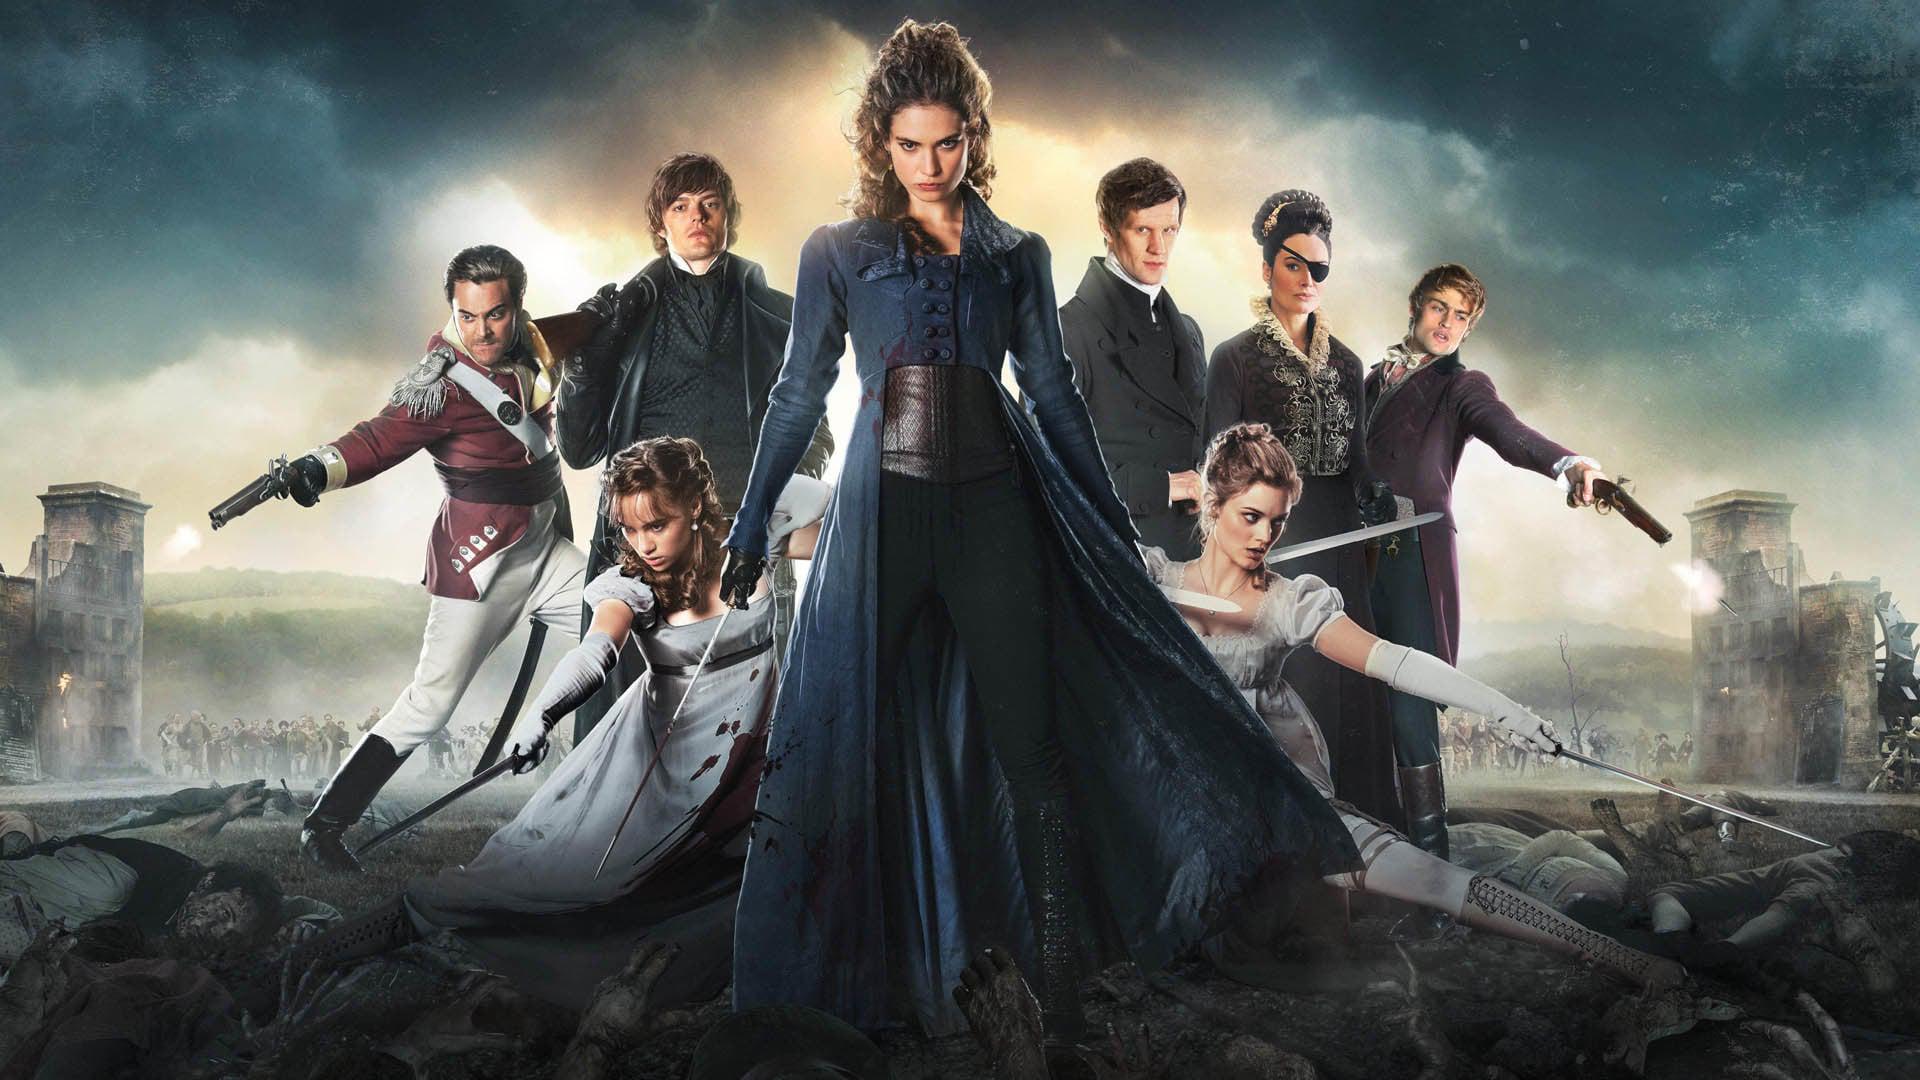 Backdrop Image for Pride and prejudice and zombies